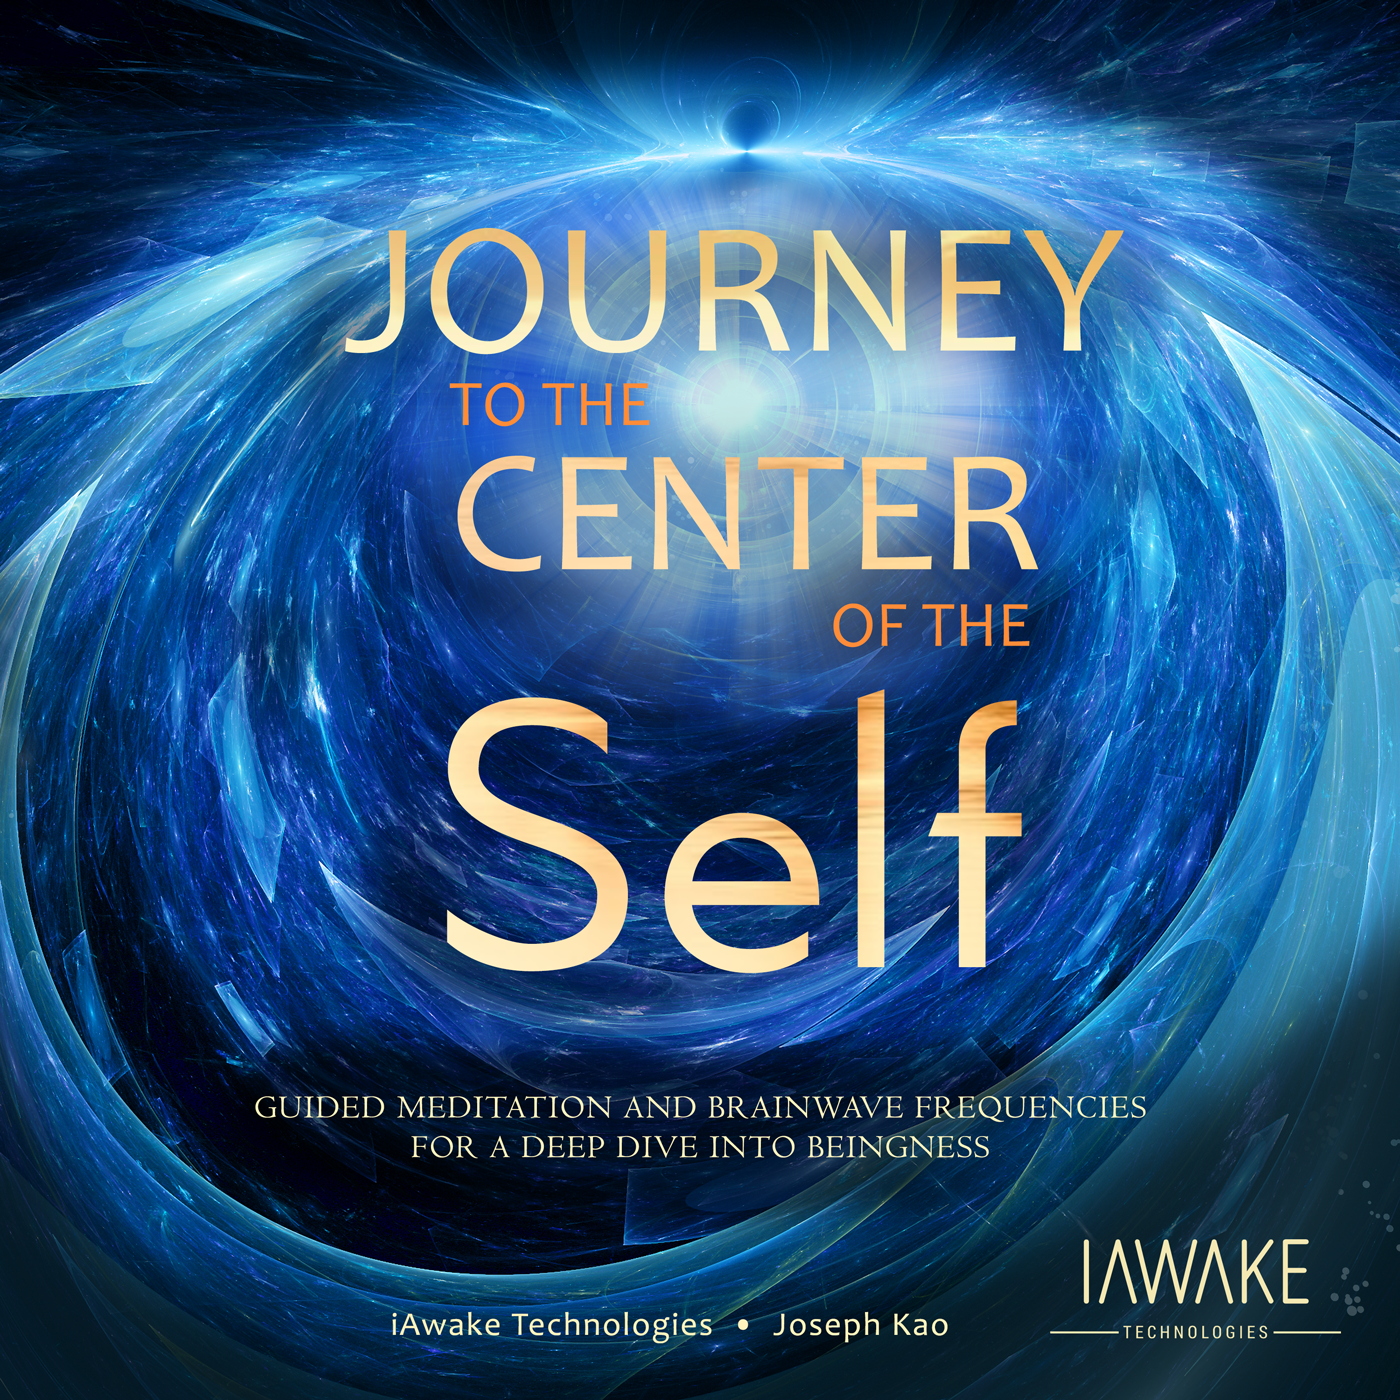 Journey to the Center of the Self - iAwake Technologies